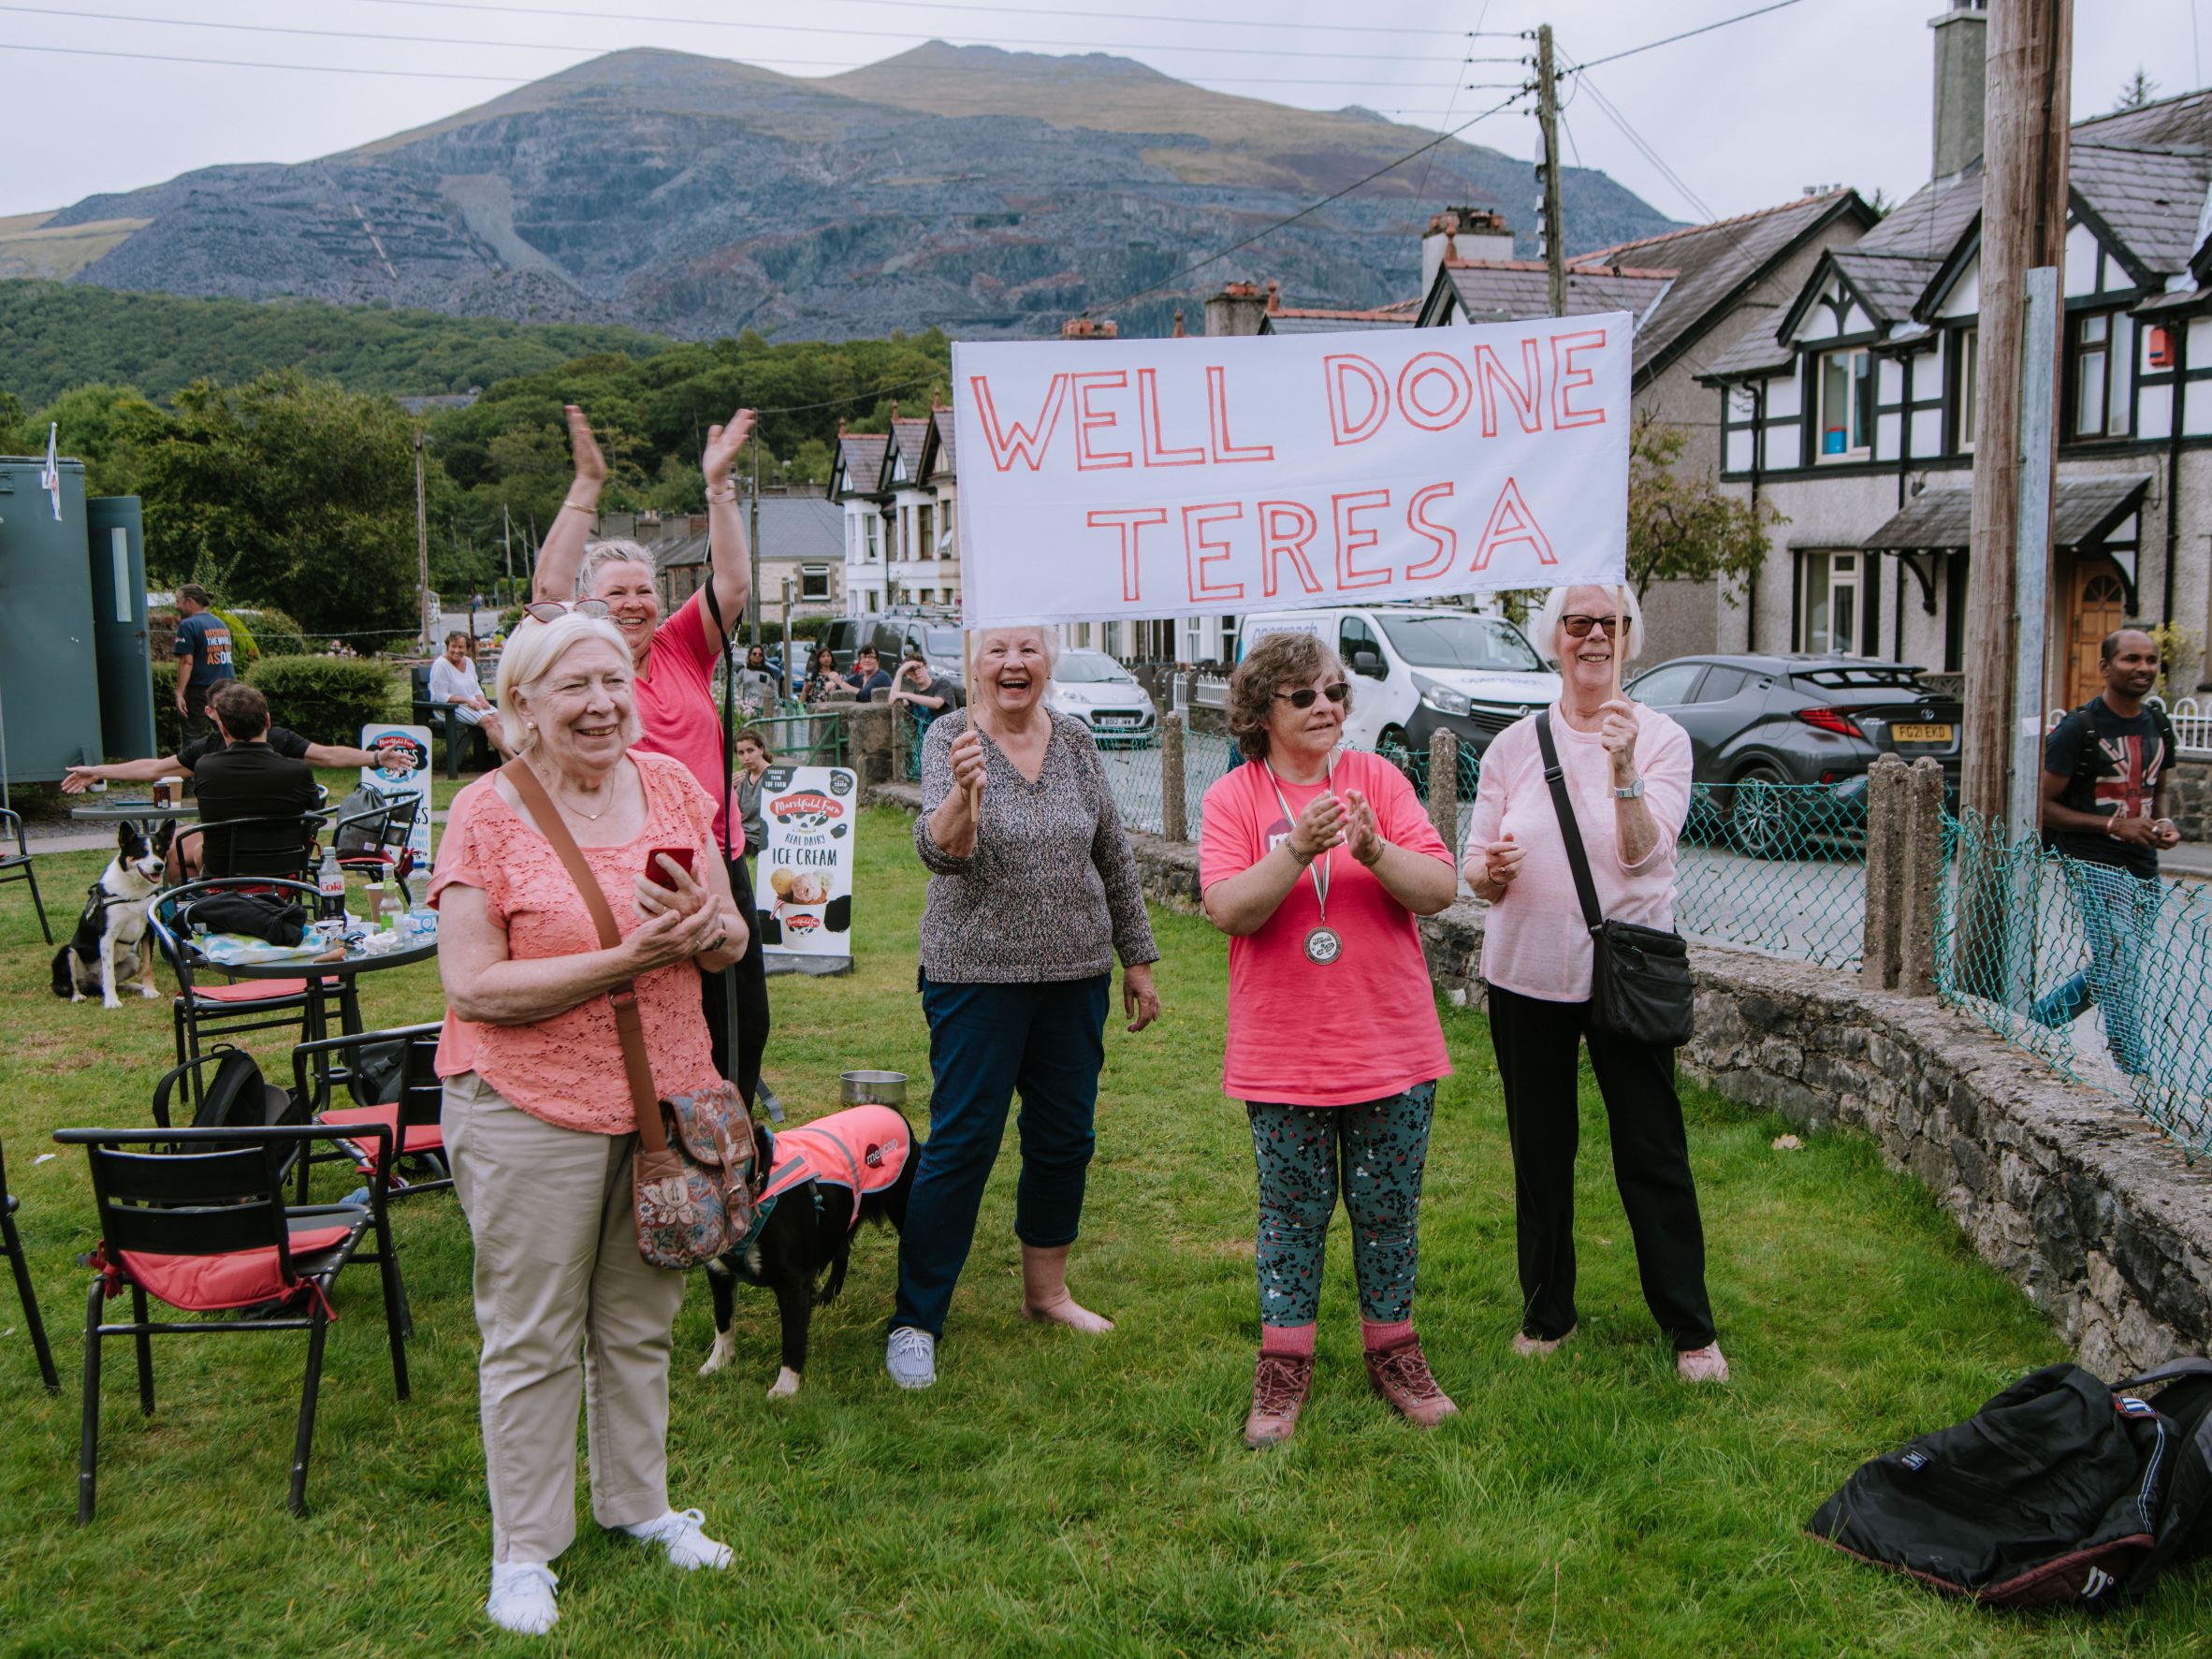 Volunteers cheering people on in a pretty country village green